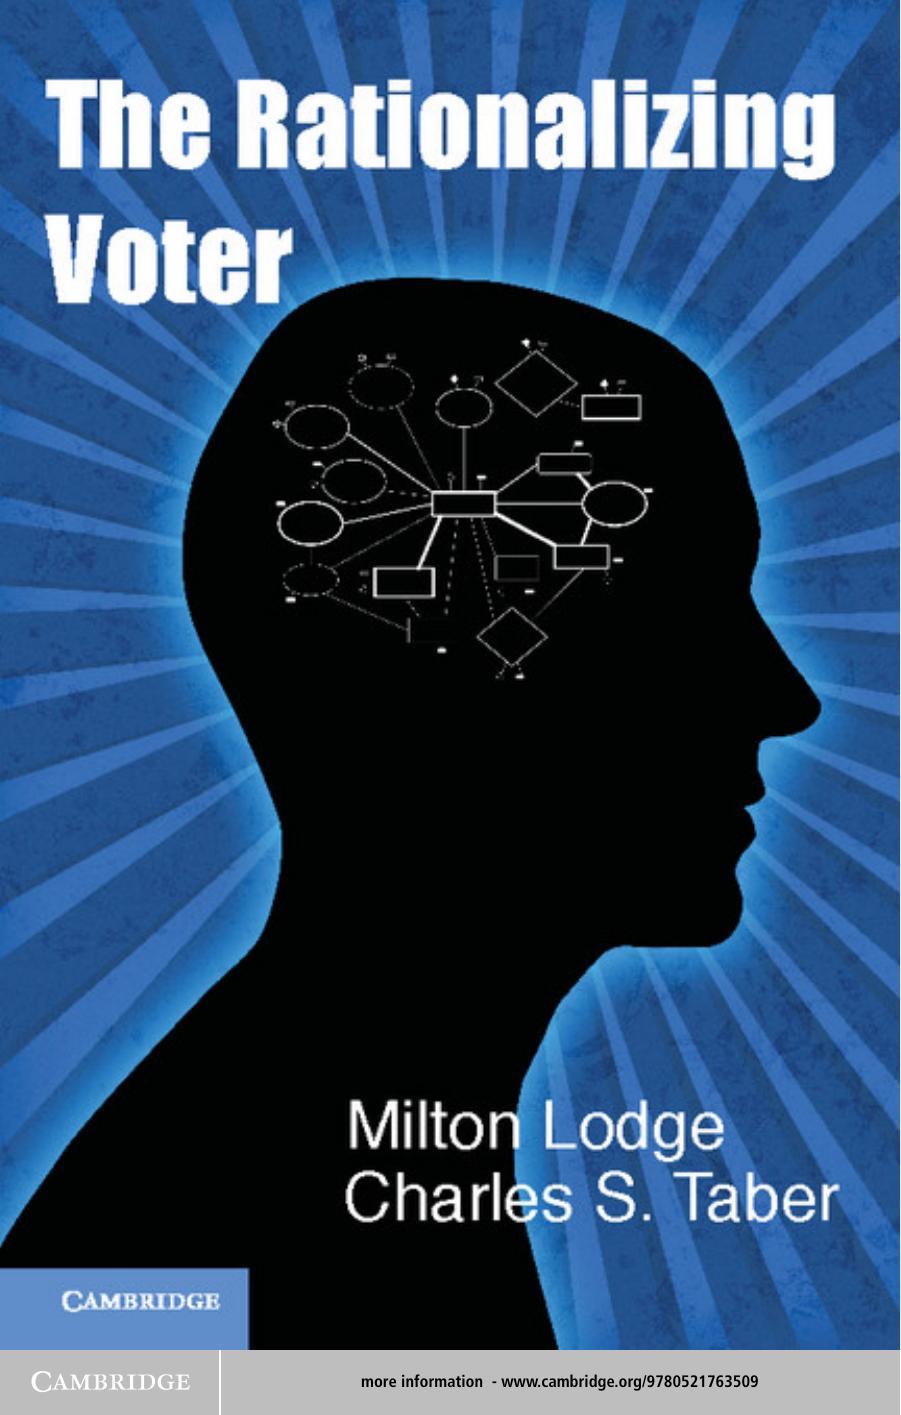 The Rationalizing Voter by Milton Lodge; Charles S. Taber